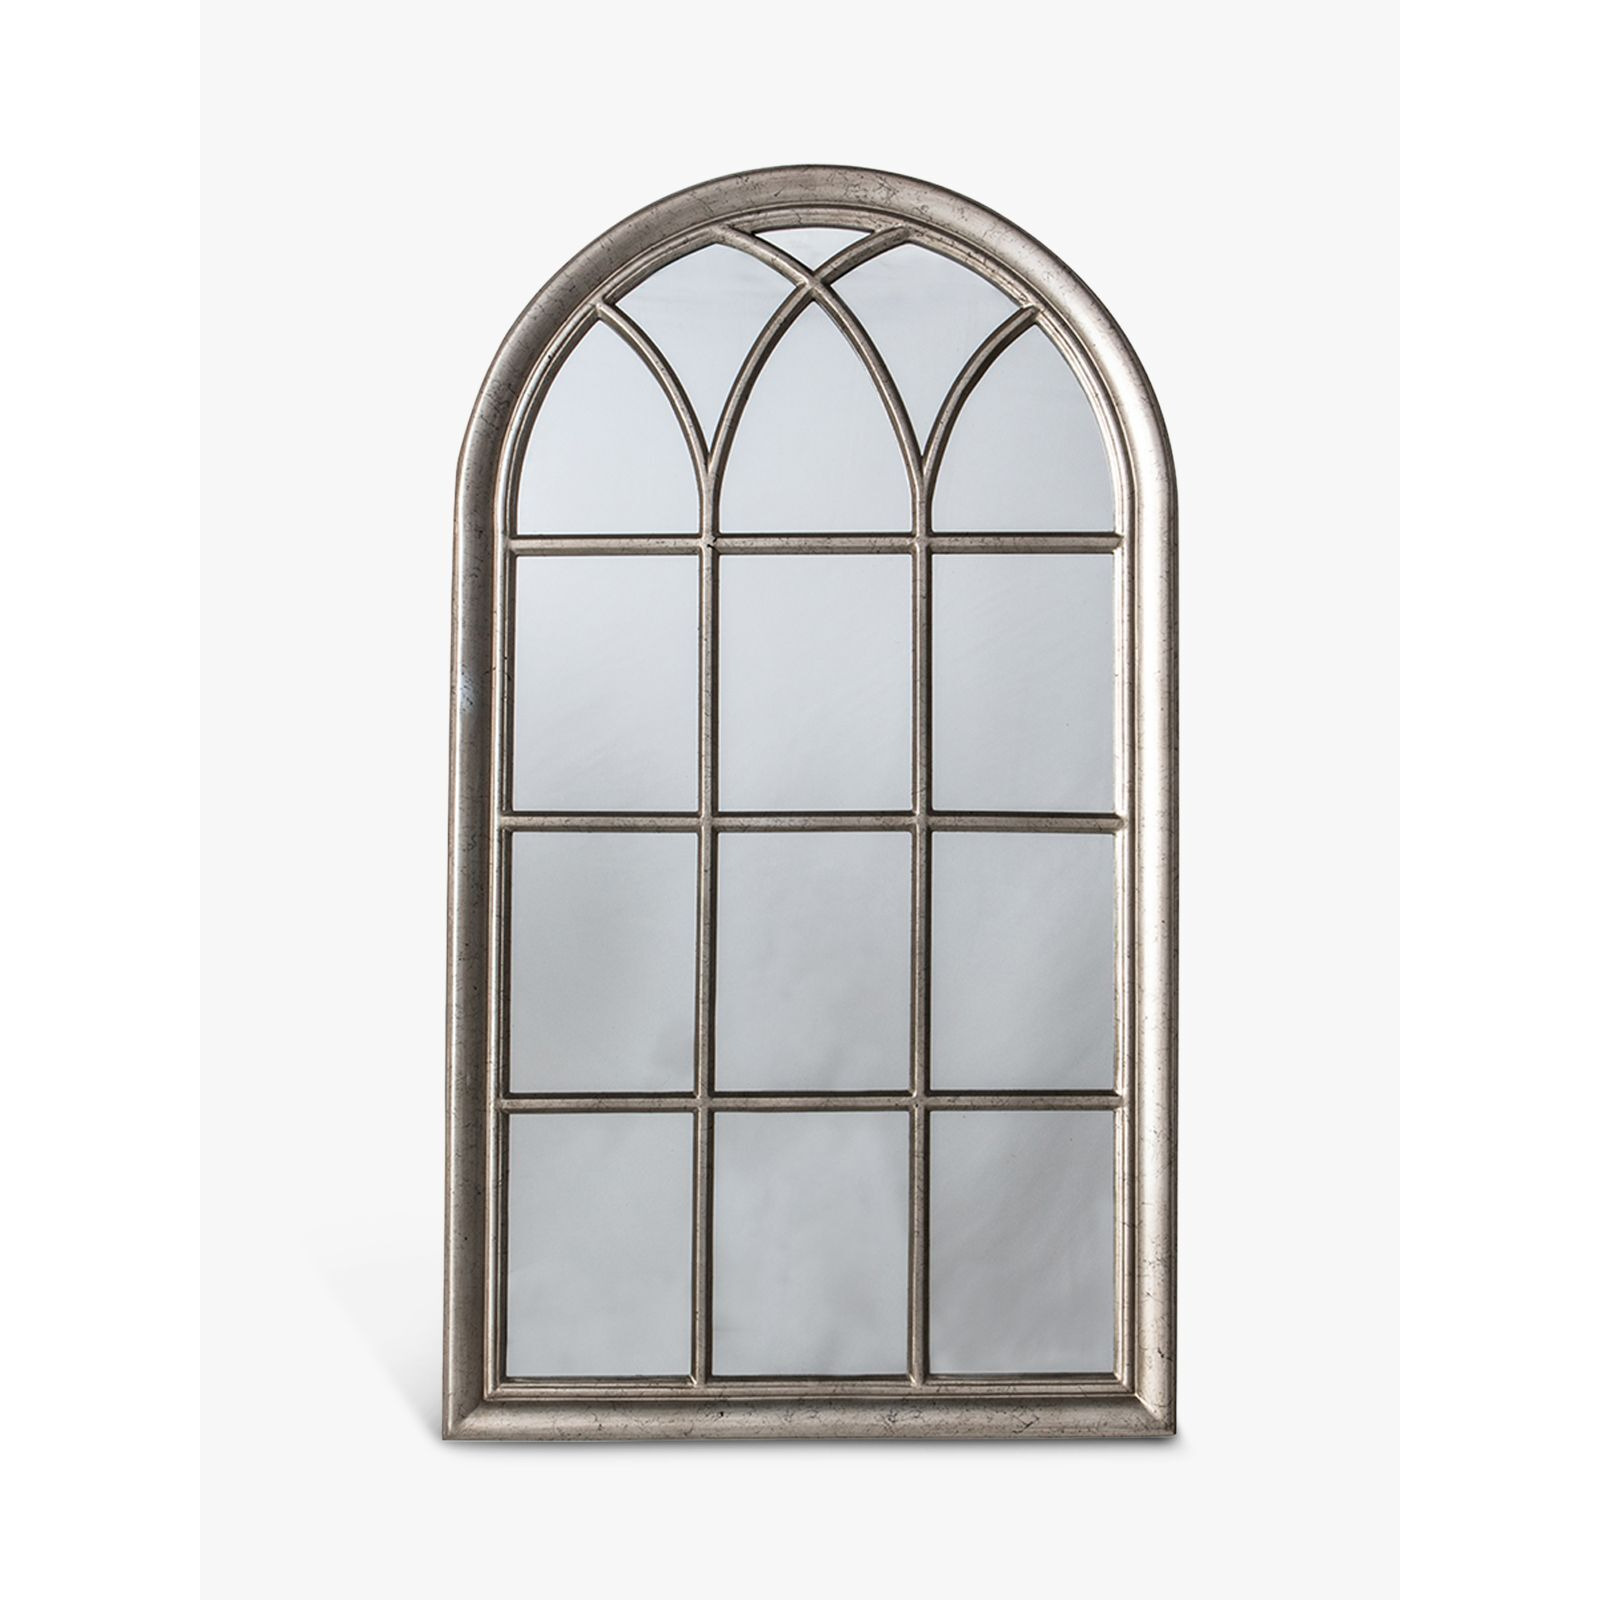 Gallery Direct Seaforth Arched Window Wall Mirror, 140 x 80cm, Silver - image 1